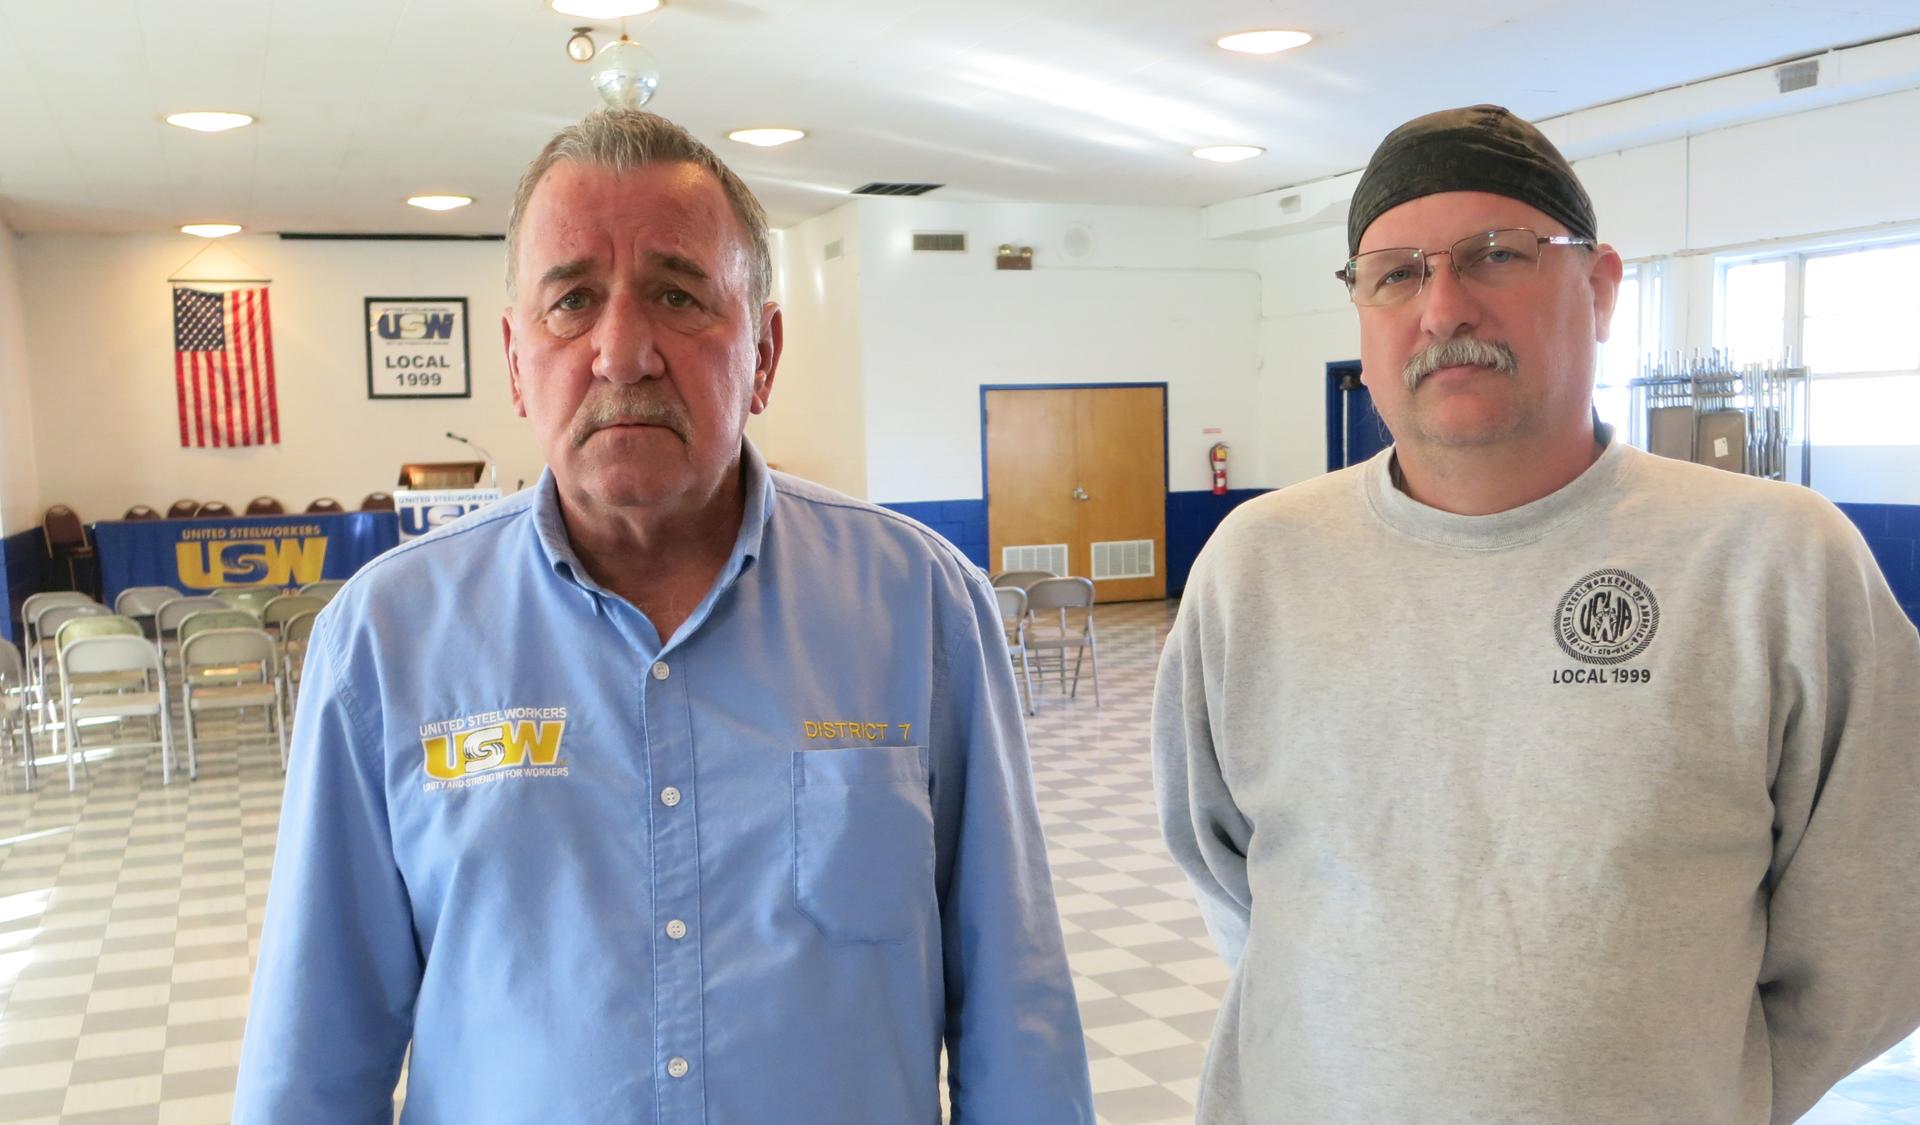 Chuck Jones (left) and Kelly Ray Hugunin, local reps with the United Steelworkers in Indianapolis, didn’t vote for Trump. They call his talk of renegotiating trade deals “sound bites” on the campaign trail.